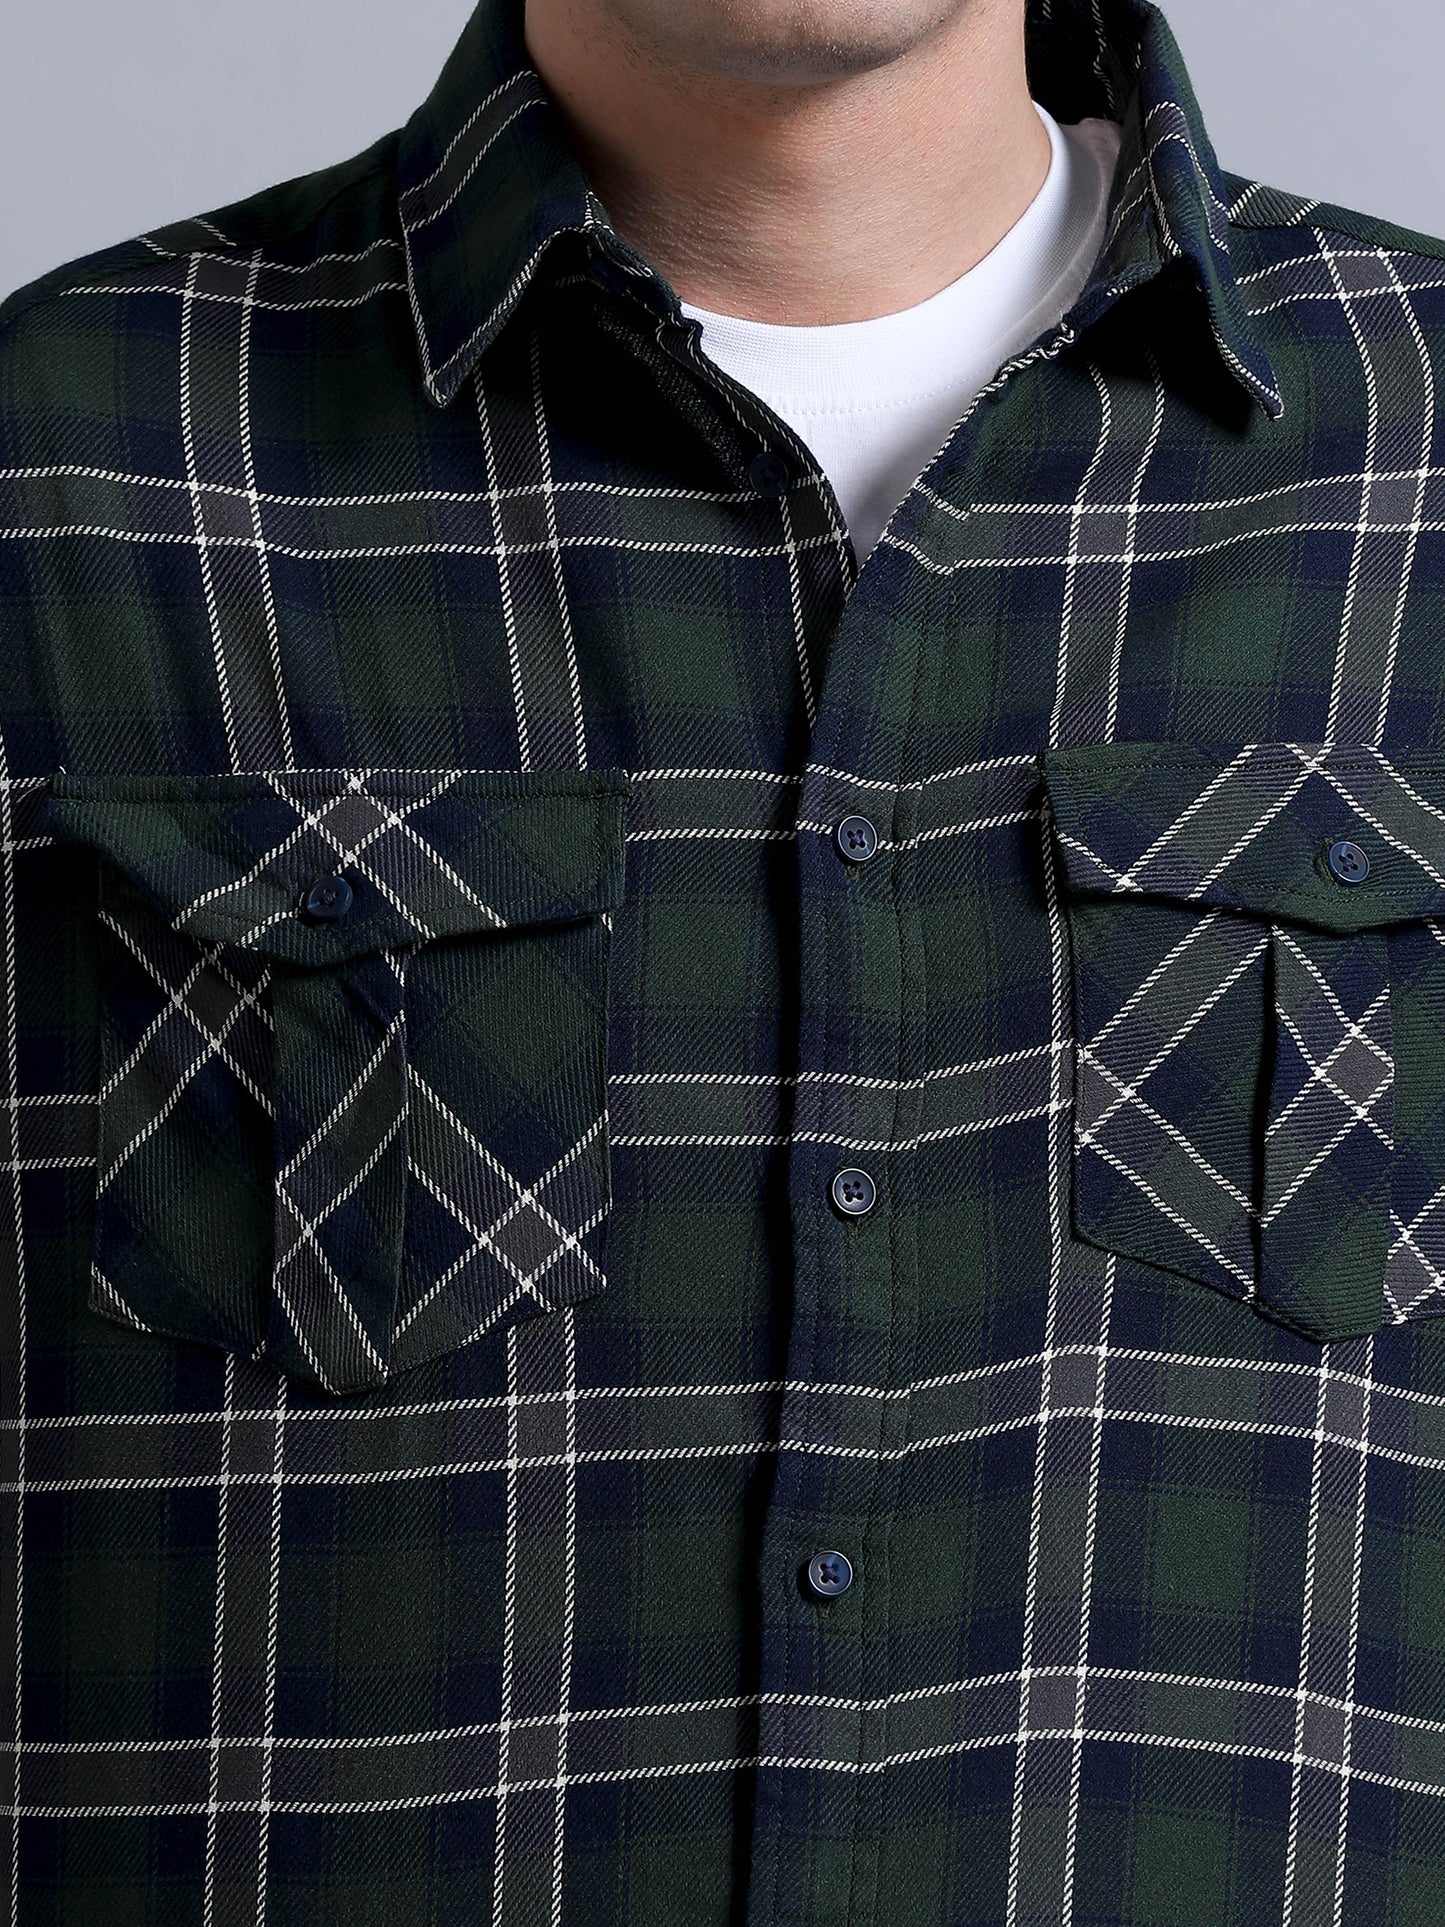 Premium Men Shirt, Relaxed Fit, Yarn Dyed Flannel Check, Pure Cotton, Full Sleeve, Green